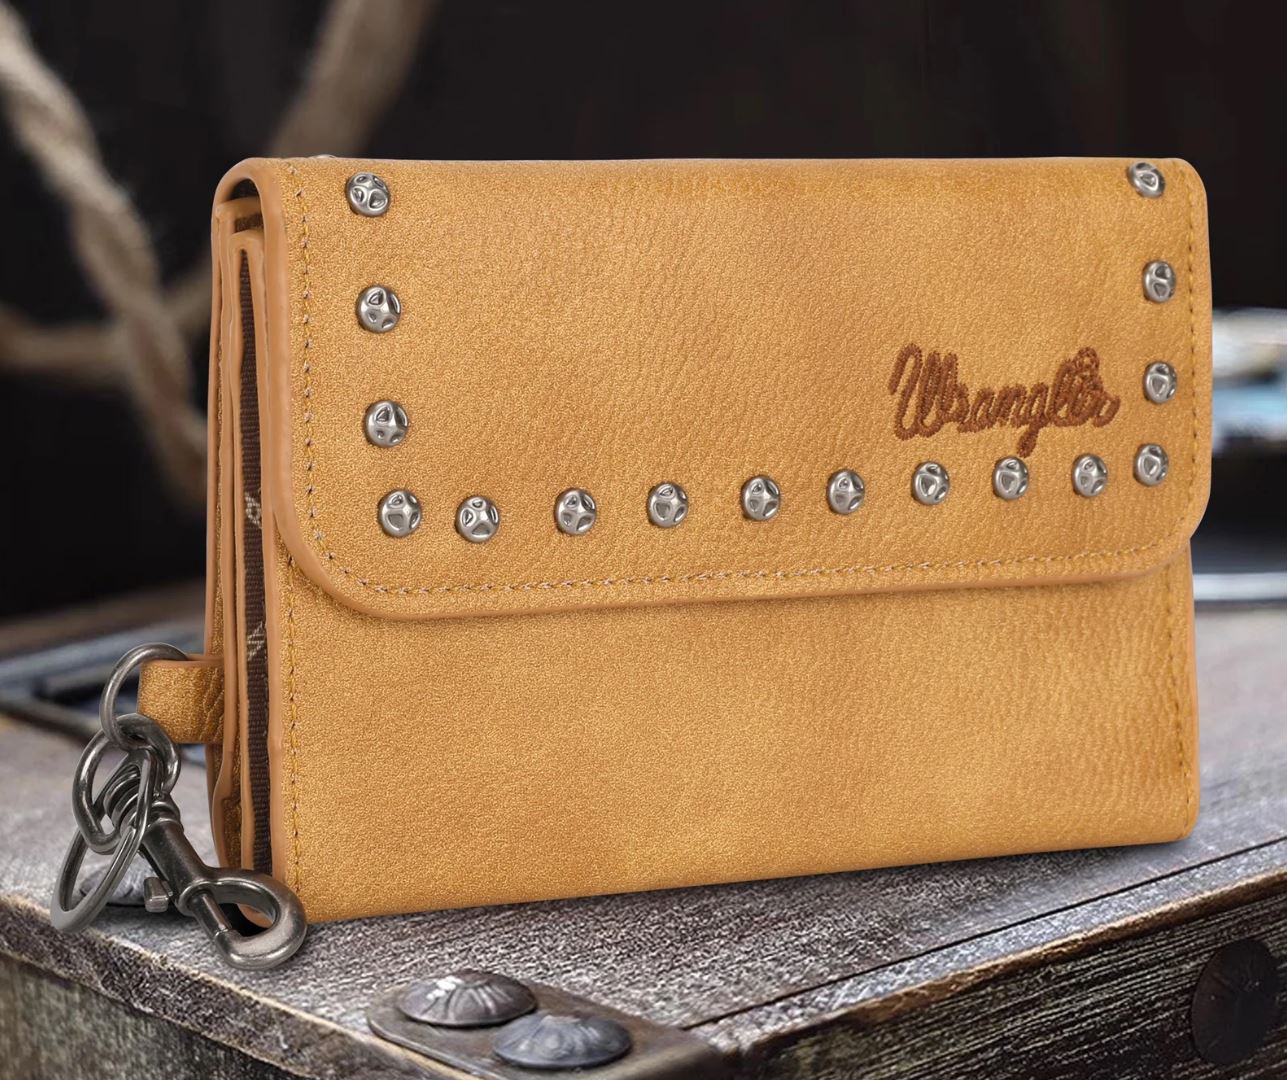 Wrangler Studded Accents Tri-fold Key-Chain Wallet - Light Brown WG89-W001LBR